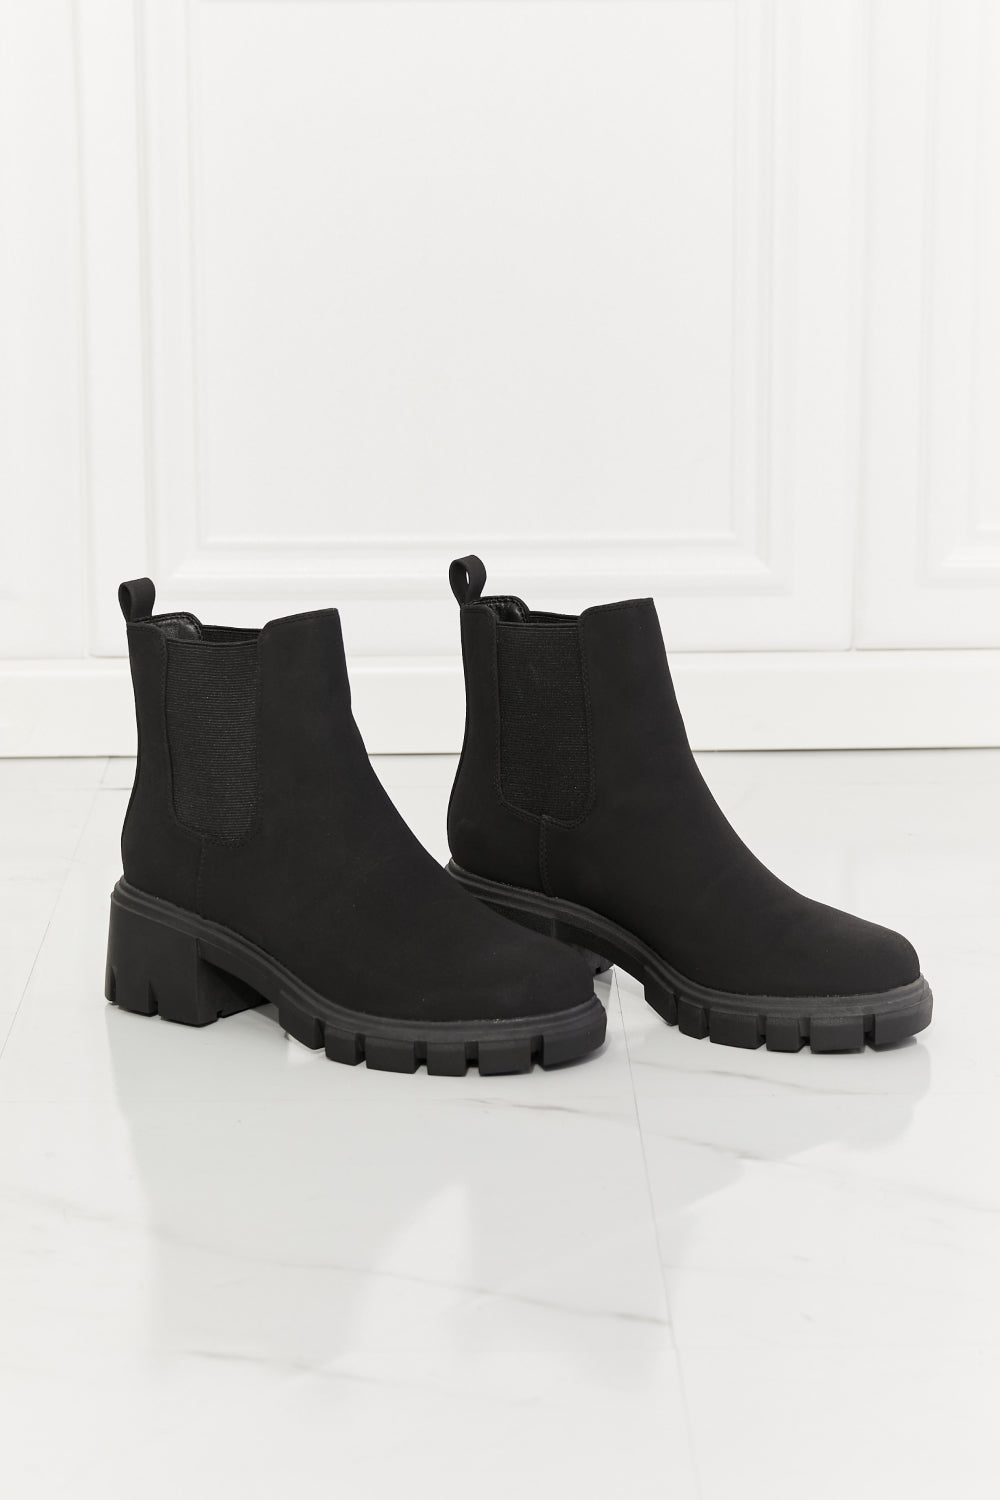 Work For It Matte Lug Sole Chelsea Boots in Black - Copper + Rose